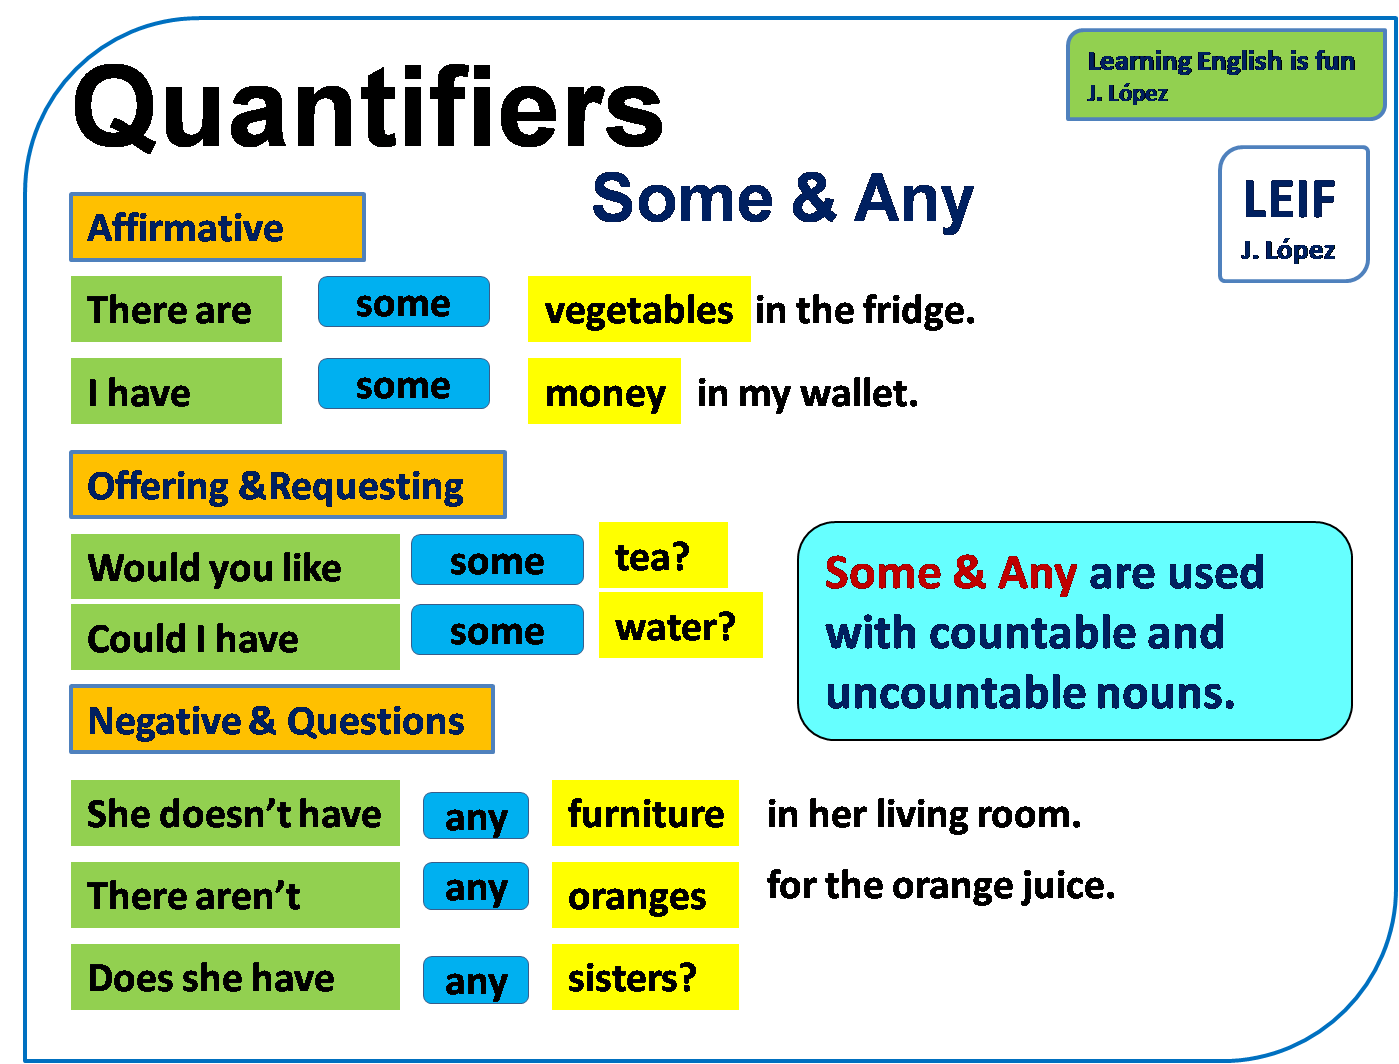 Does she living there. Determiners and quantifiers в английском. Quantifiers грамматика. Quantifiers в английском языке. Countable uncountable в английском языке.